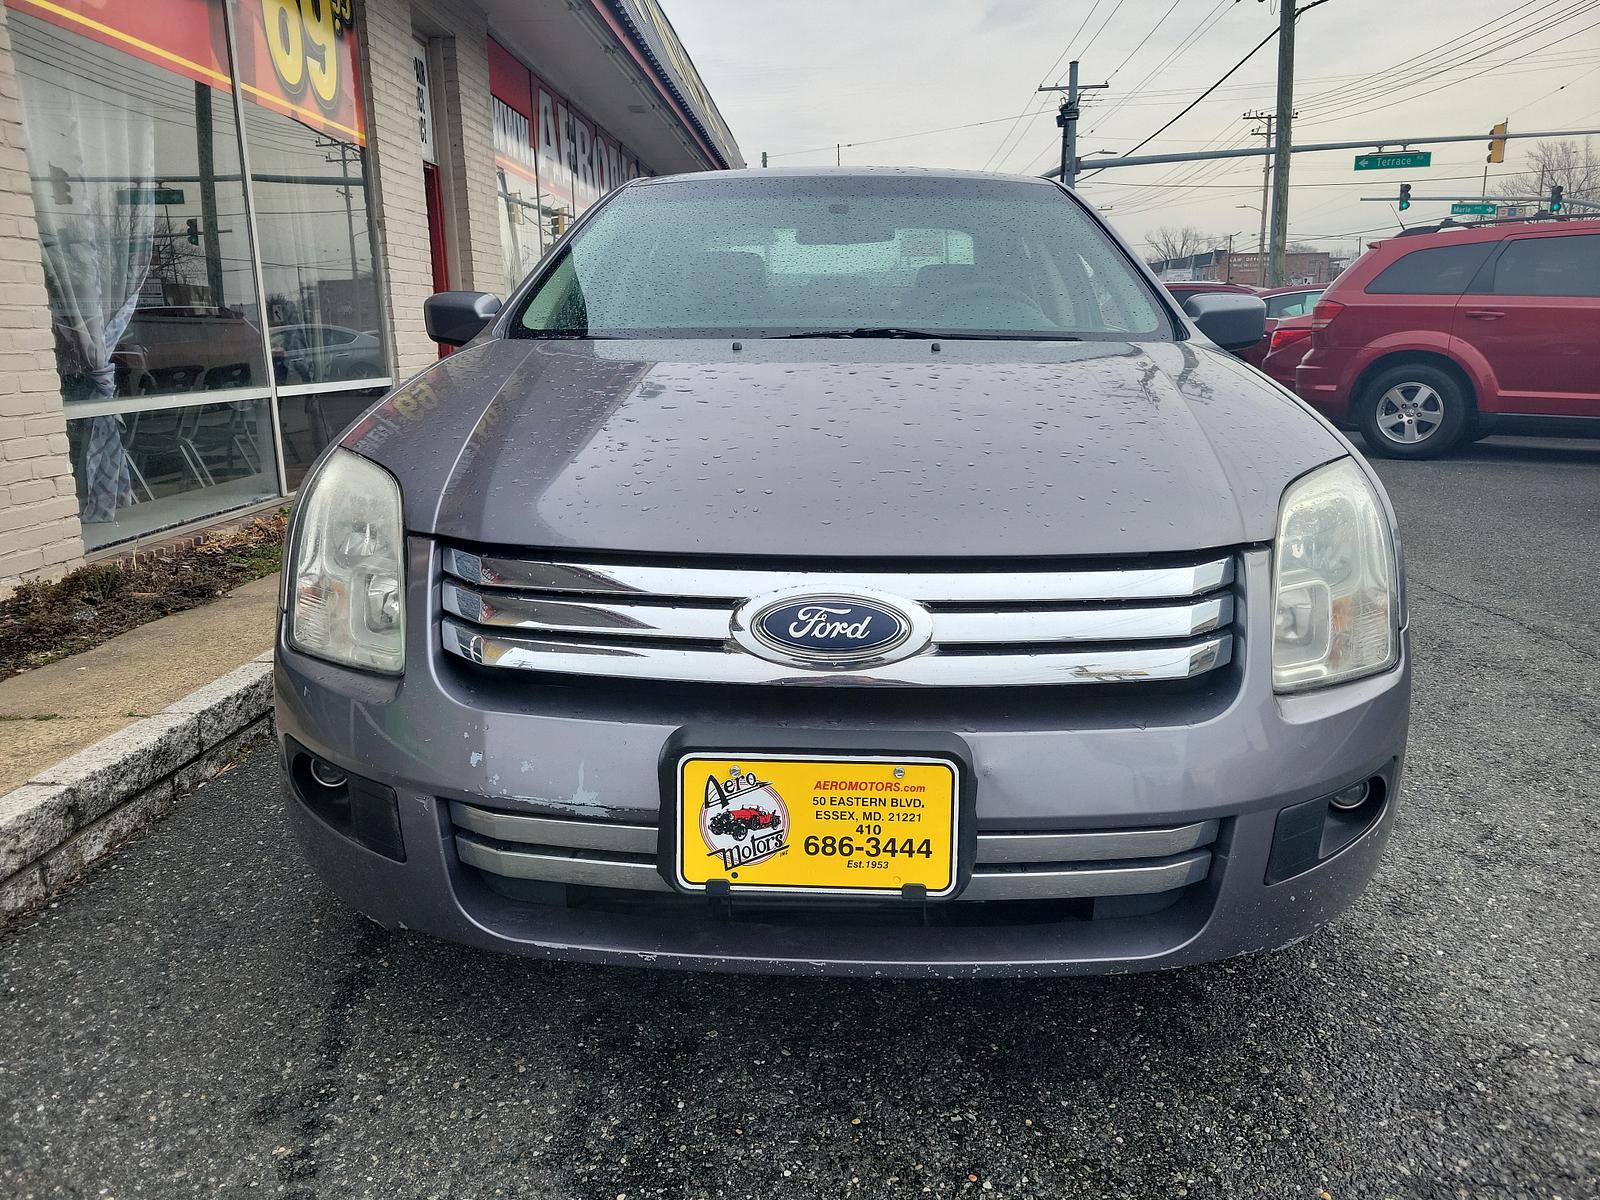 2007 Tungsten Silver Metallic - T8 /Charcoal - W Ford Fusion SE (3FAHP07Z37R) with an 2.3L 16V I4 DURATEC ENGINE engine, located at 50 Eastern Blvd., Essex, MD, 21221, (410) 686-3444, 39.304367, -76.484947 - <p>This 2007 Ford Fusion SE Sedan in Tungsten Silver Metallic is ready to make you smile. Powered by a 2.3 Liter 4 Cylinder generating 160hp while connected to a 5 Speed Automatic transmission. Driving this sleek Front Wheel Drive Sedan, you can secure up to 31mpg on the highway. </p><p><br></p><p>T - Photo #1